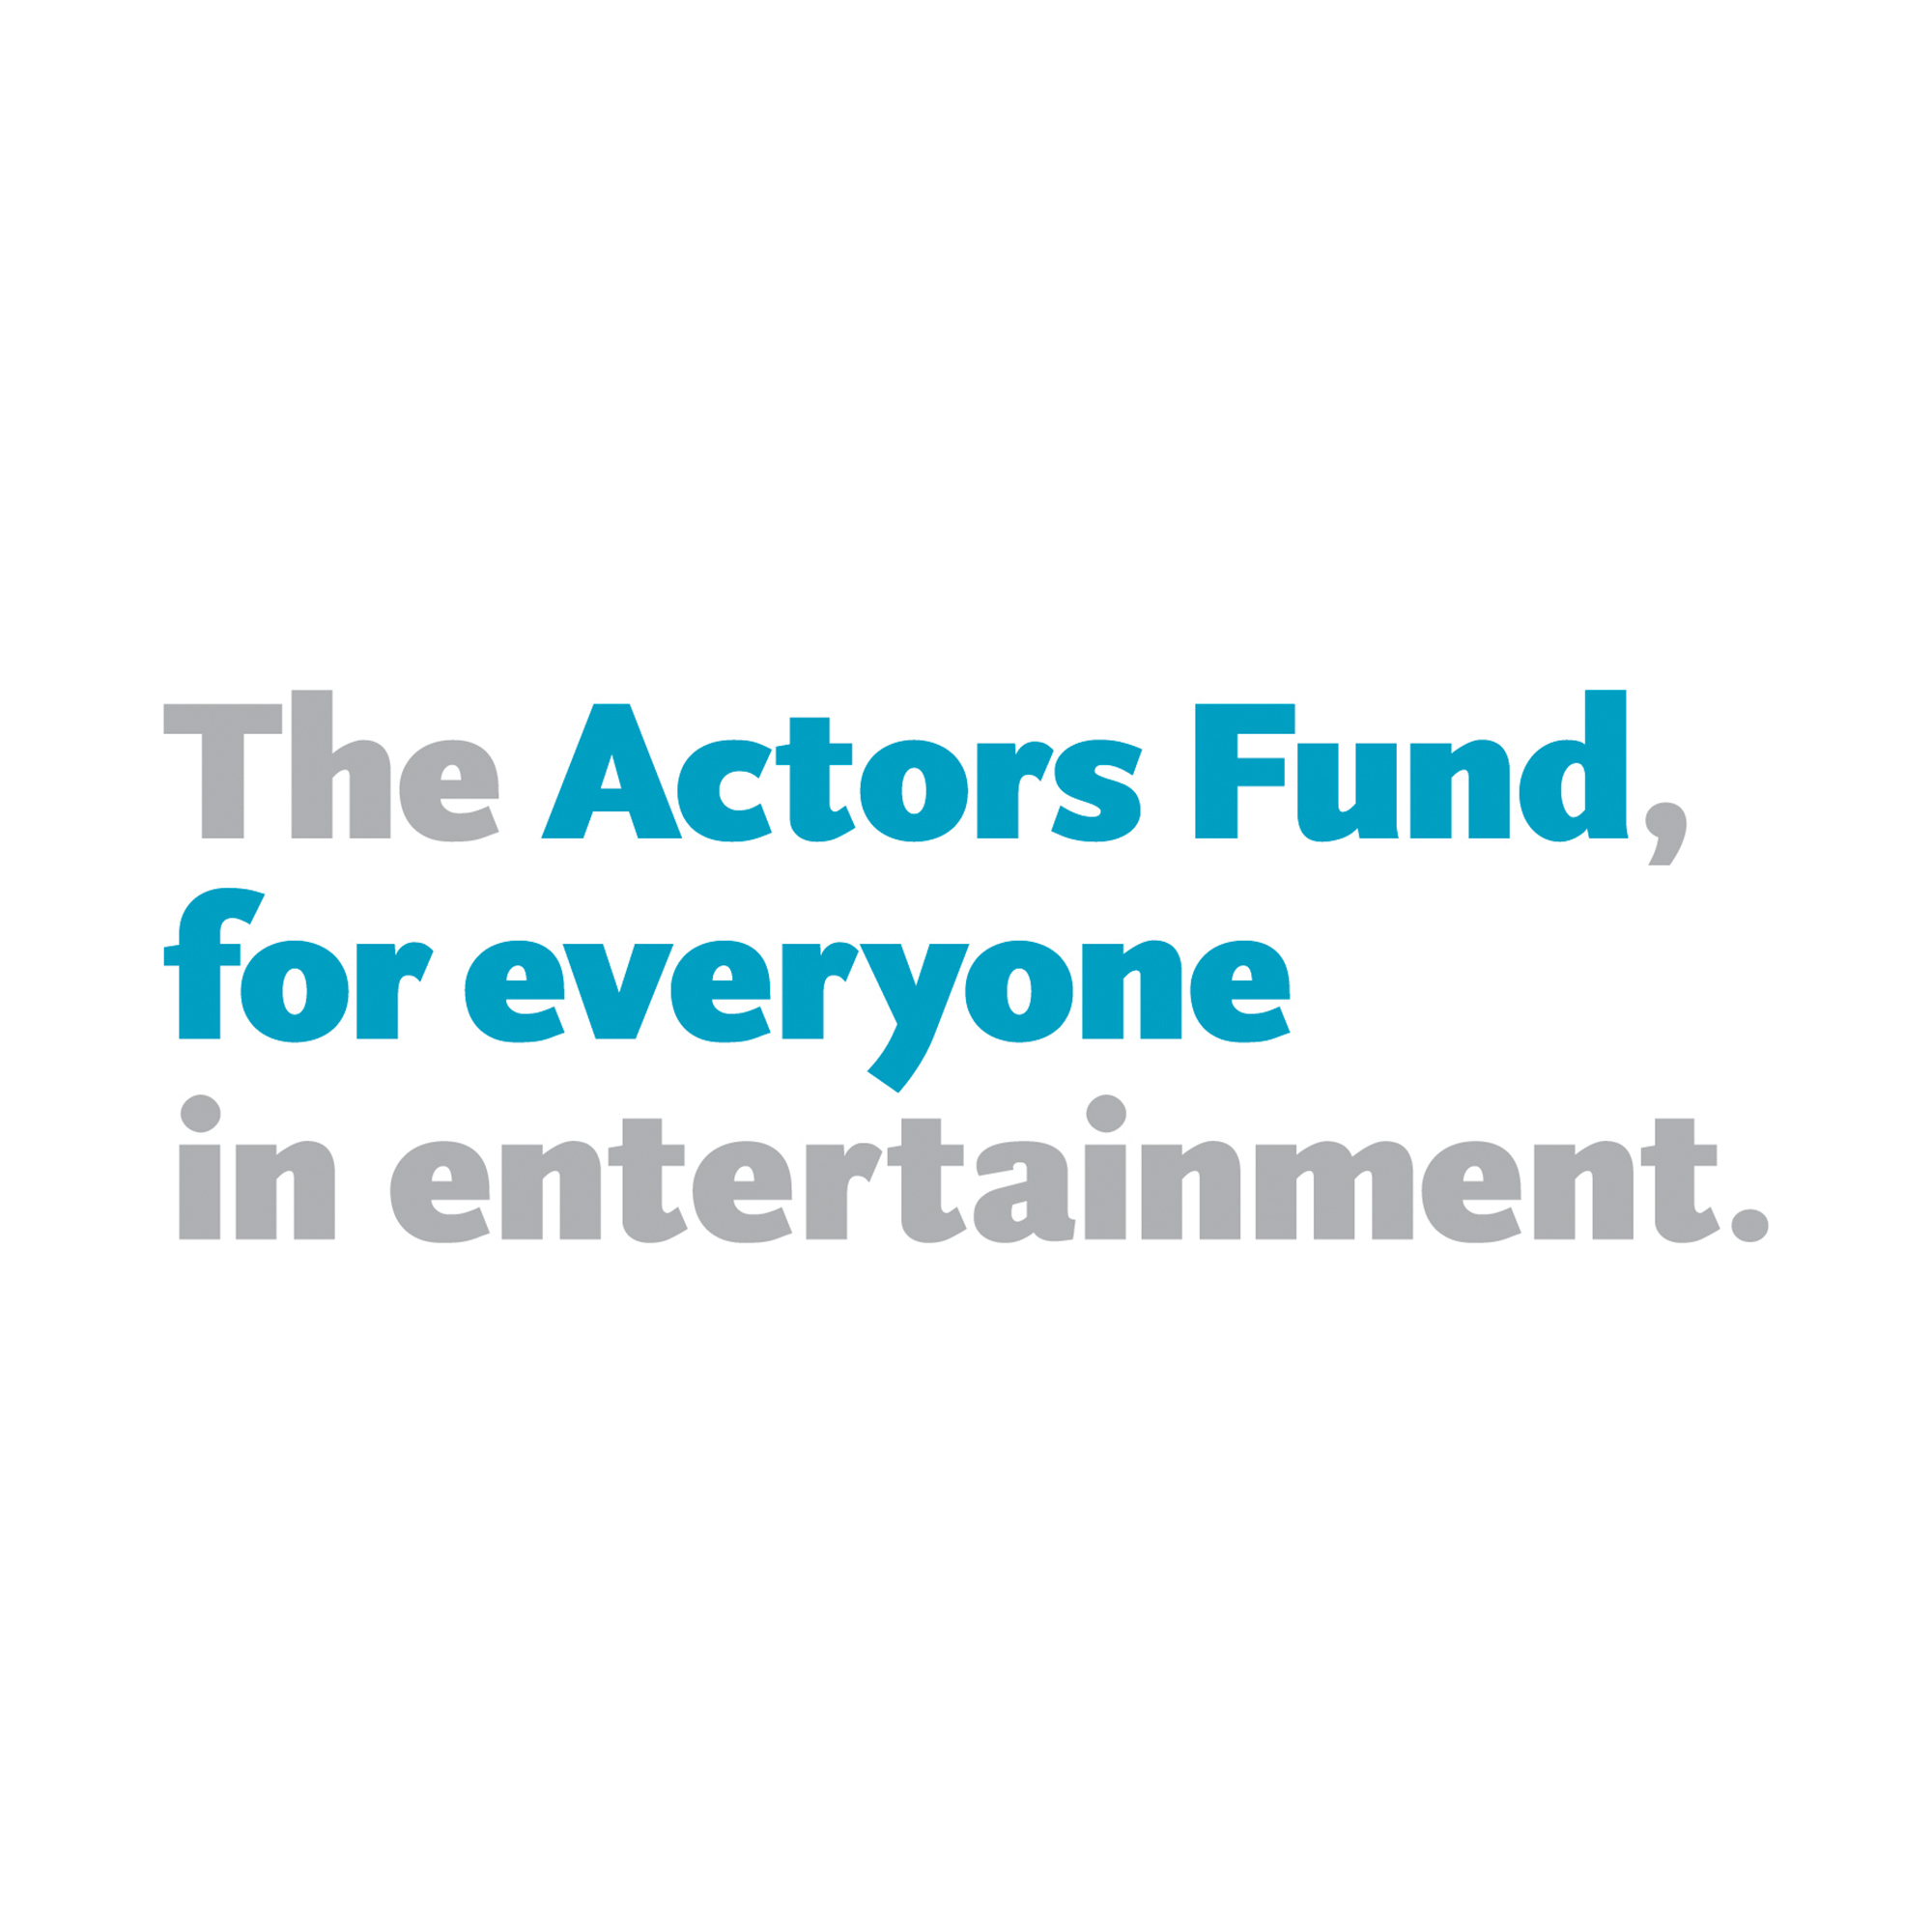 EOAD-Clients-Actors Fund.jpg